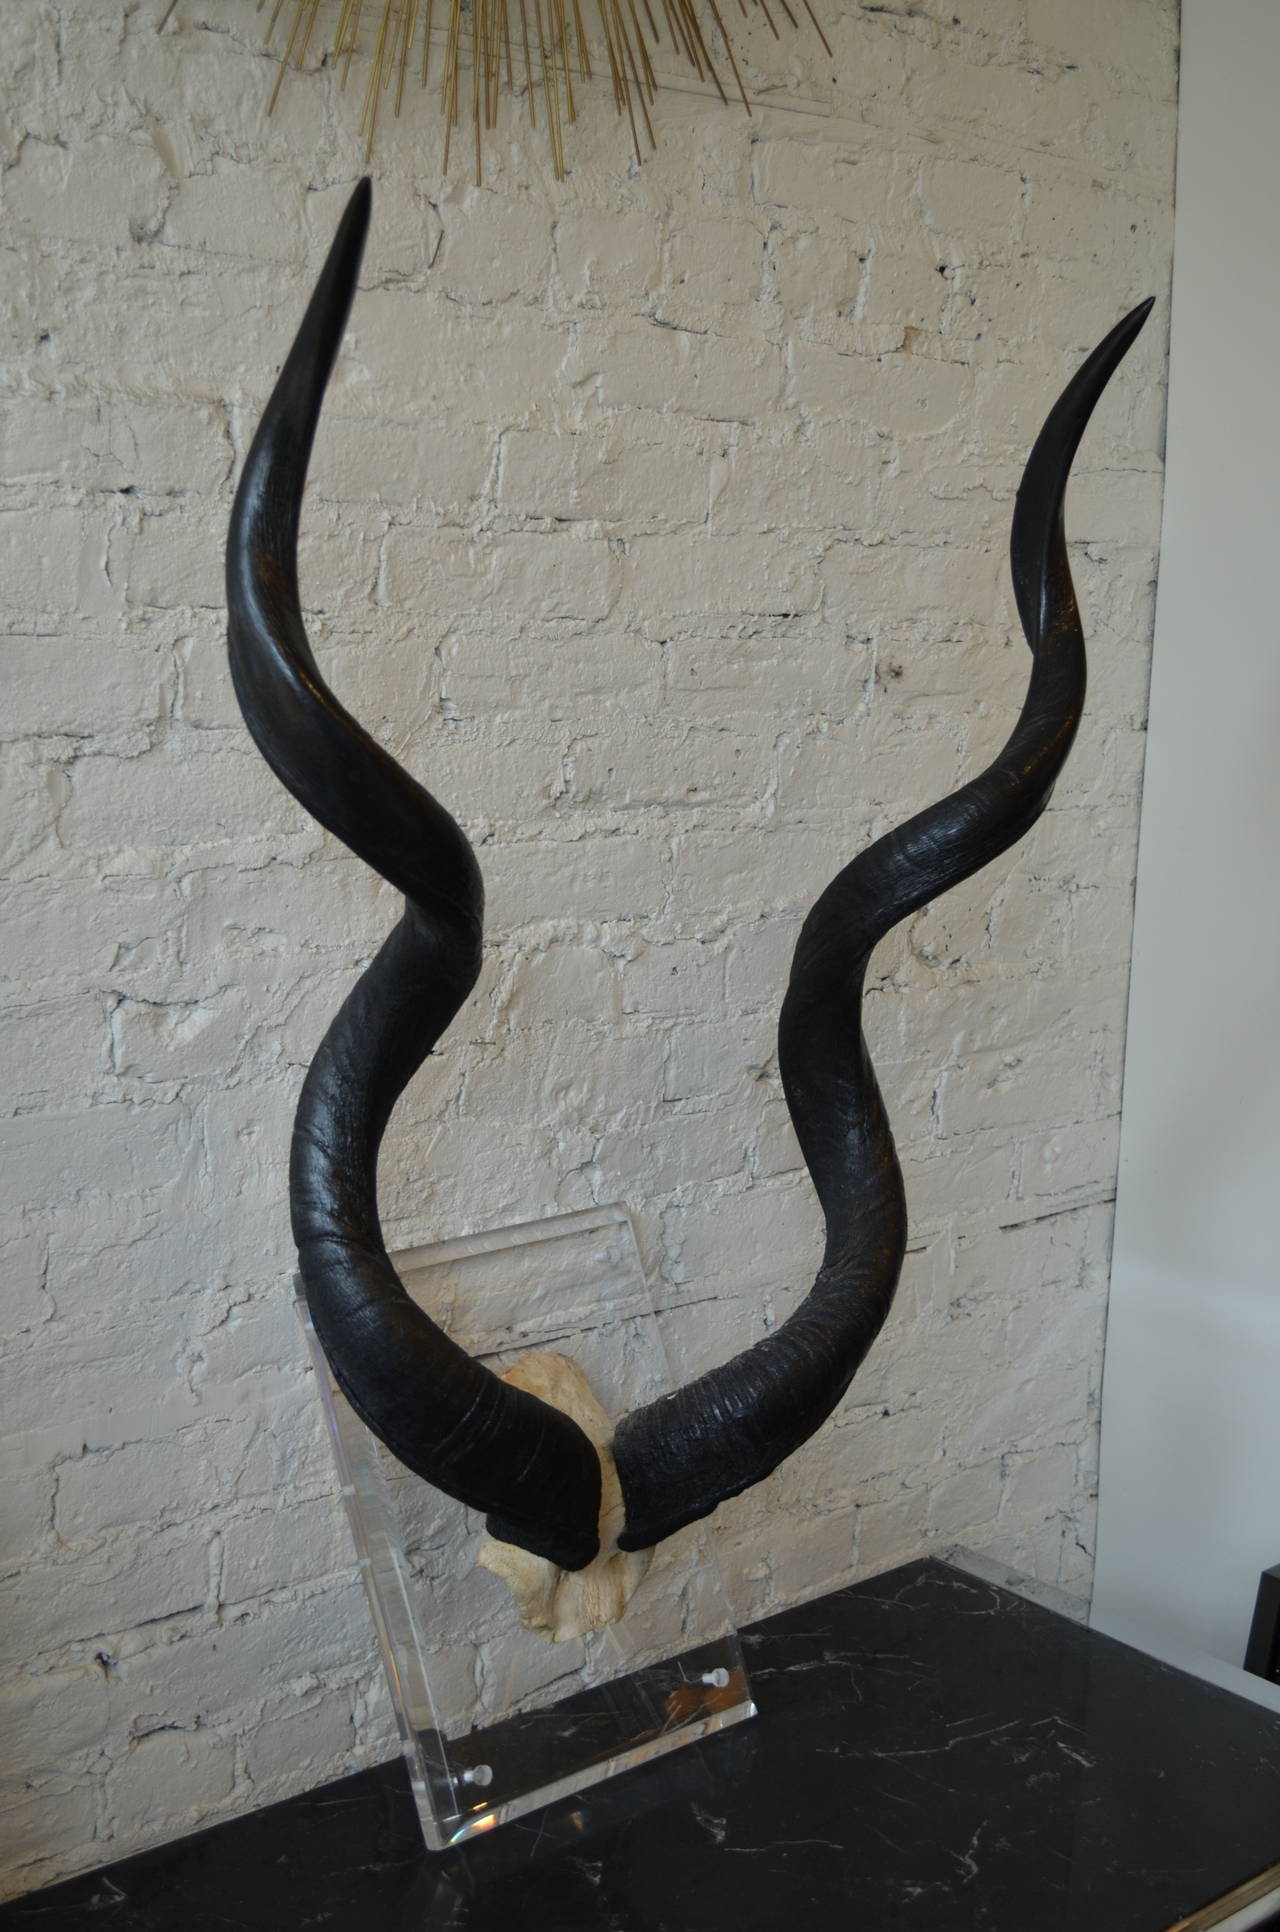 An impressive pair of kudo  horns trophy 
mounted on a thick lucite slab in the manner of
Karl Springer.